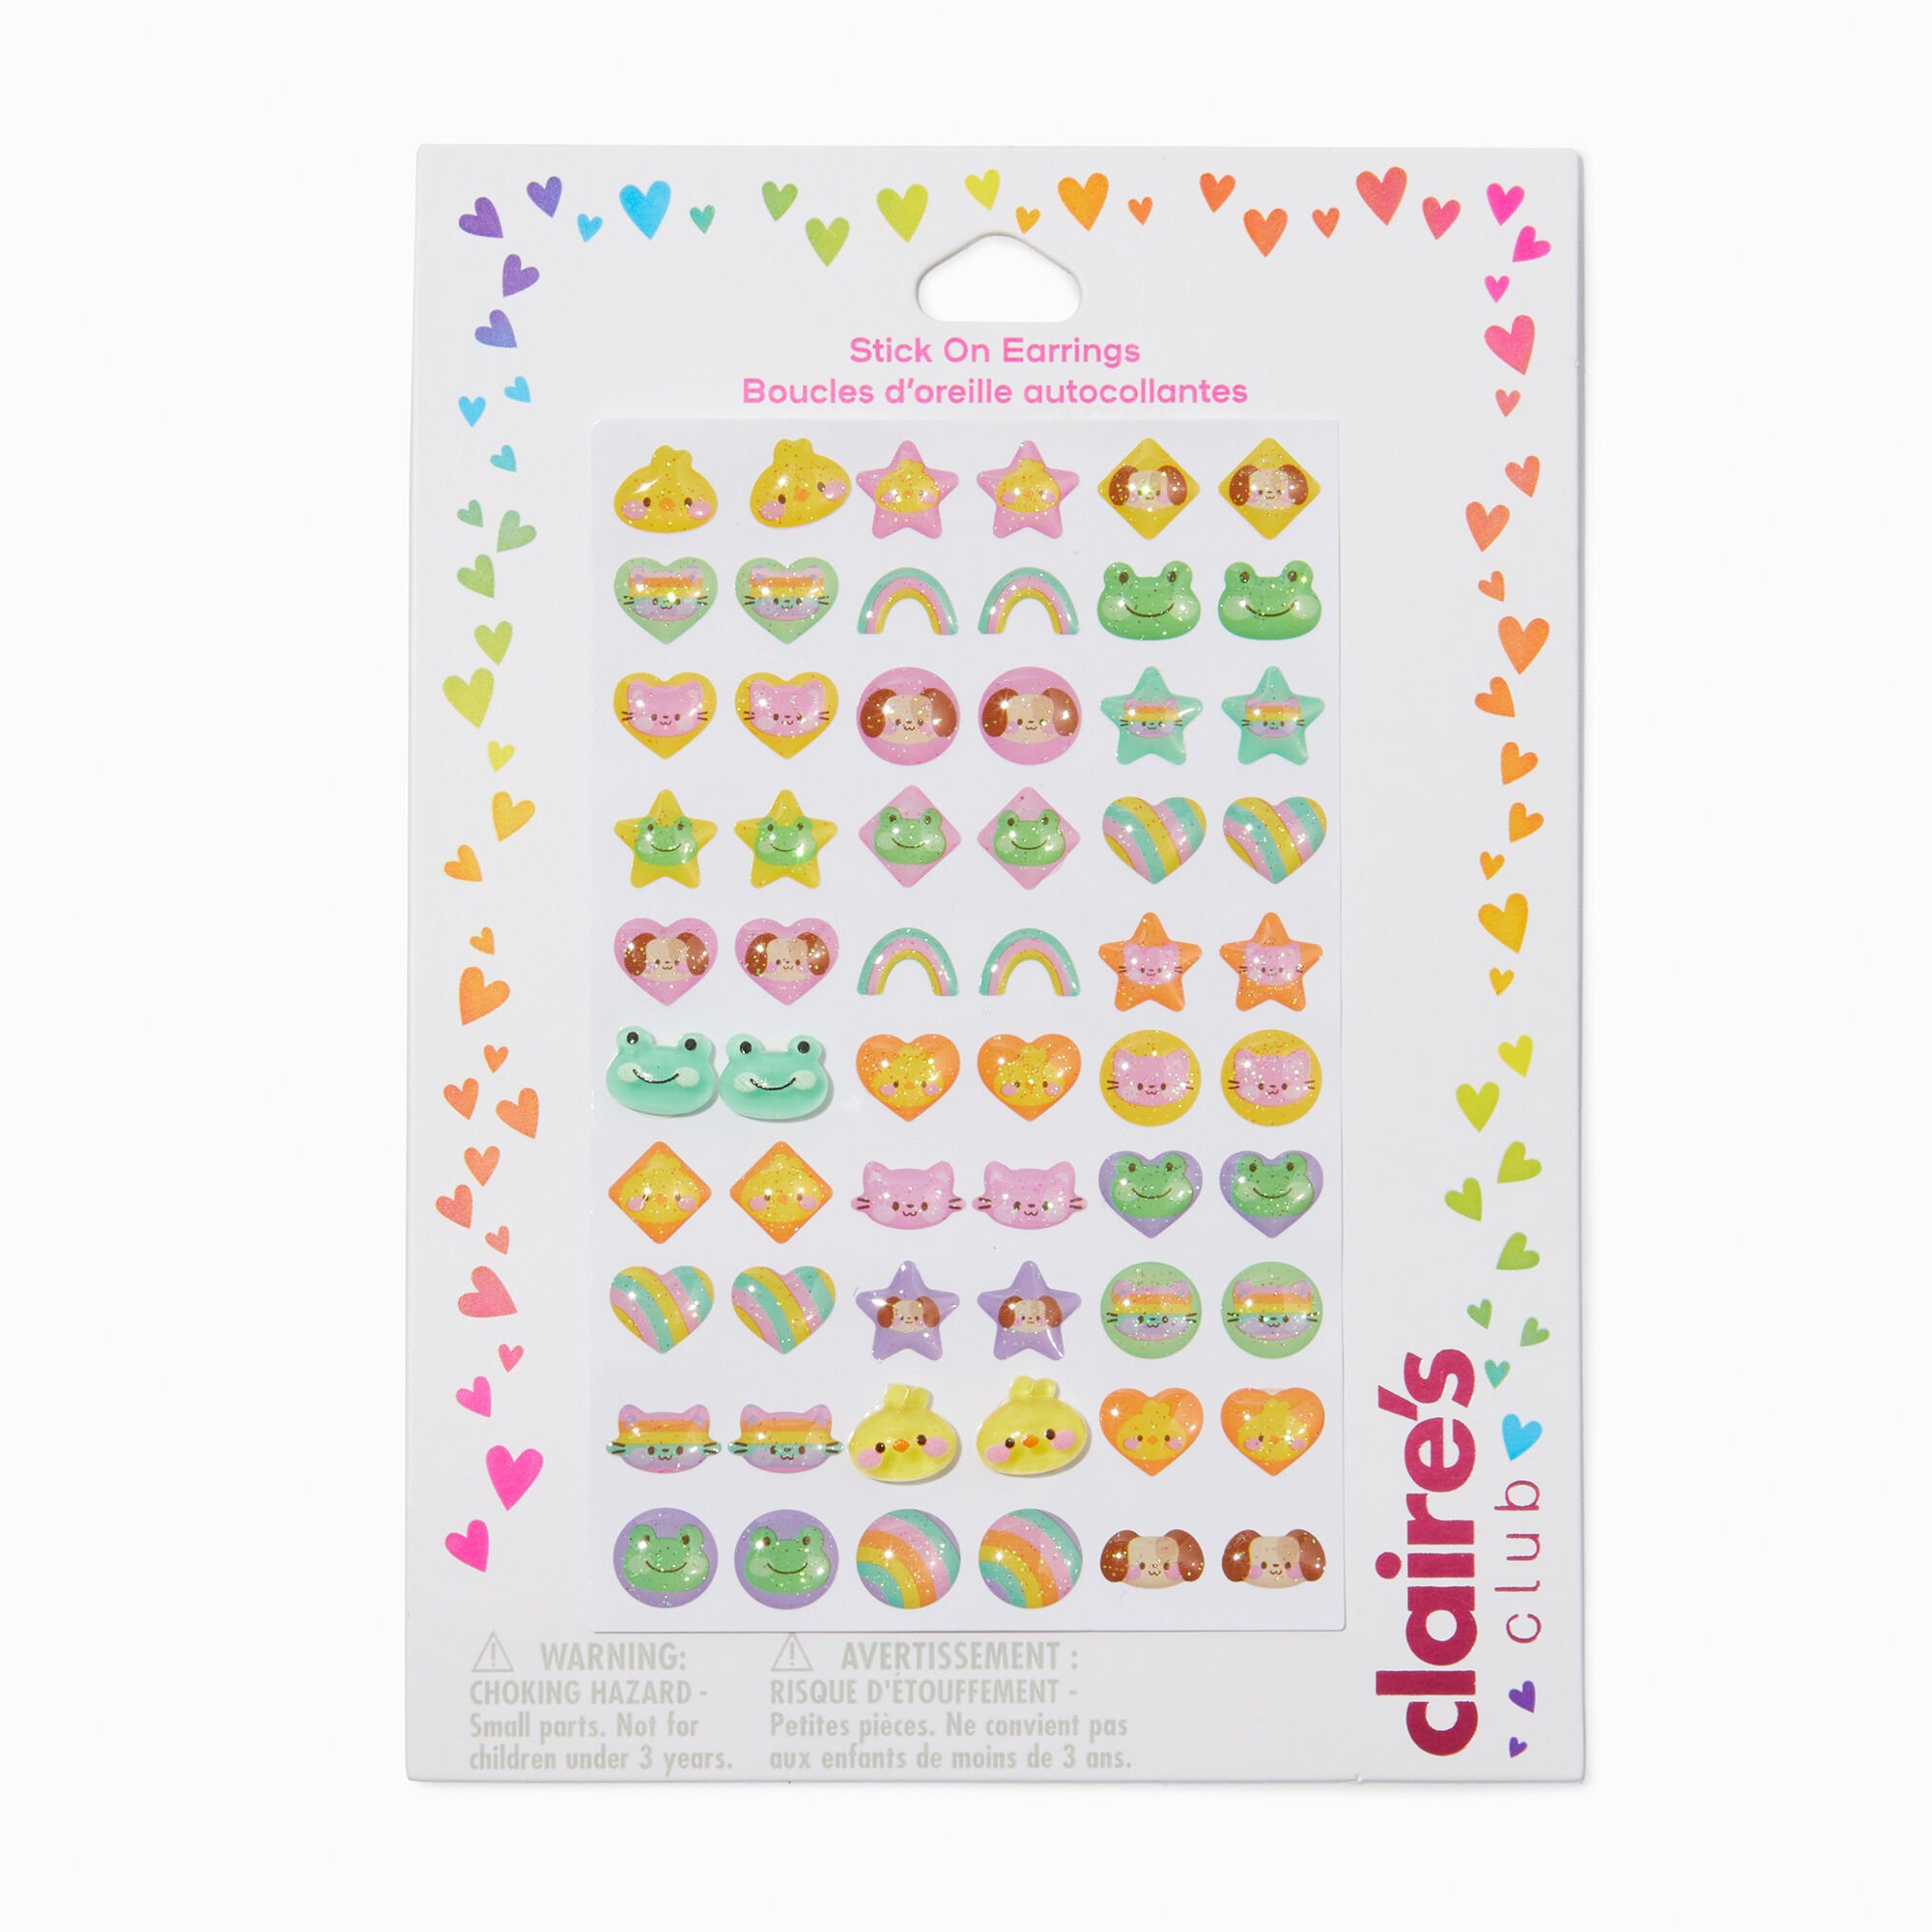 View Claires Club Pastel Glitter Critter Stick On Earrings 30 Pack information